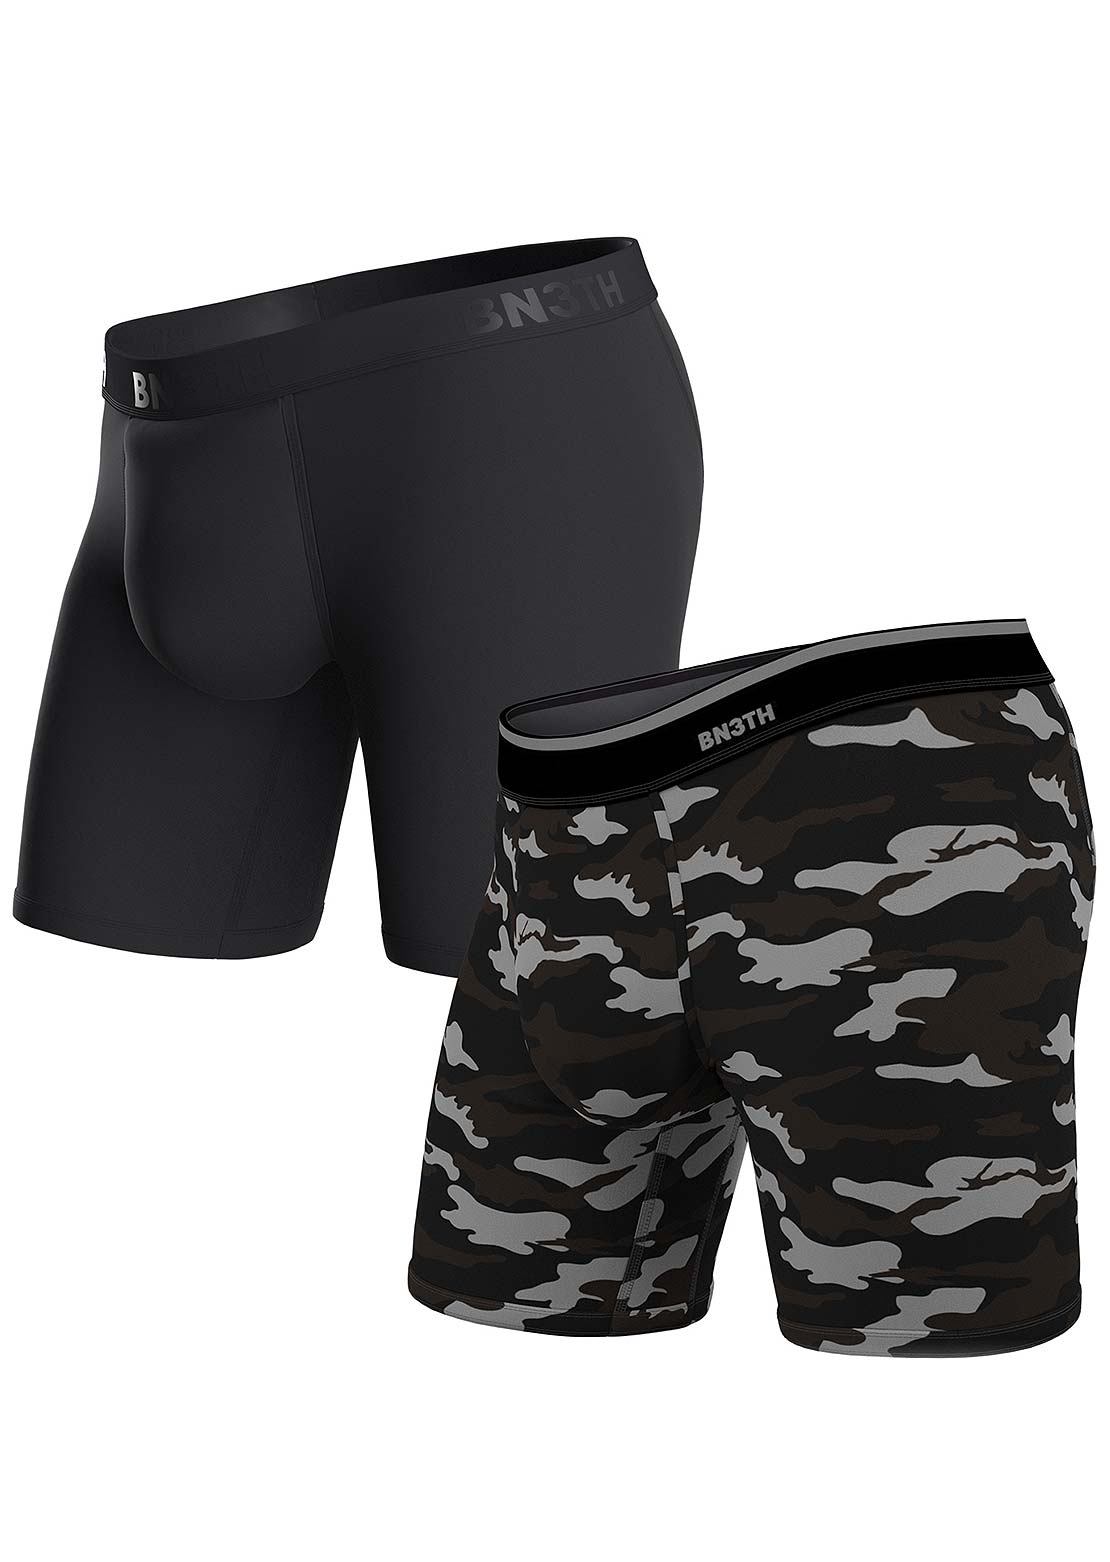 BN3TH Men&#39;s Classic Brief Boxers - 2 Pack Black/Covert Camo 2 Pack